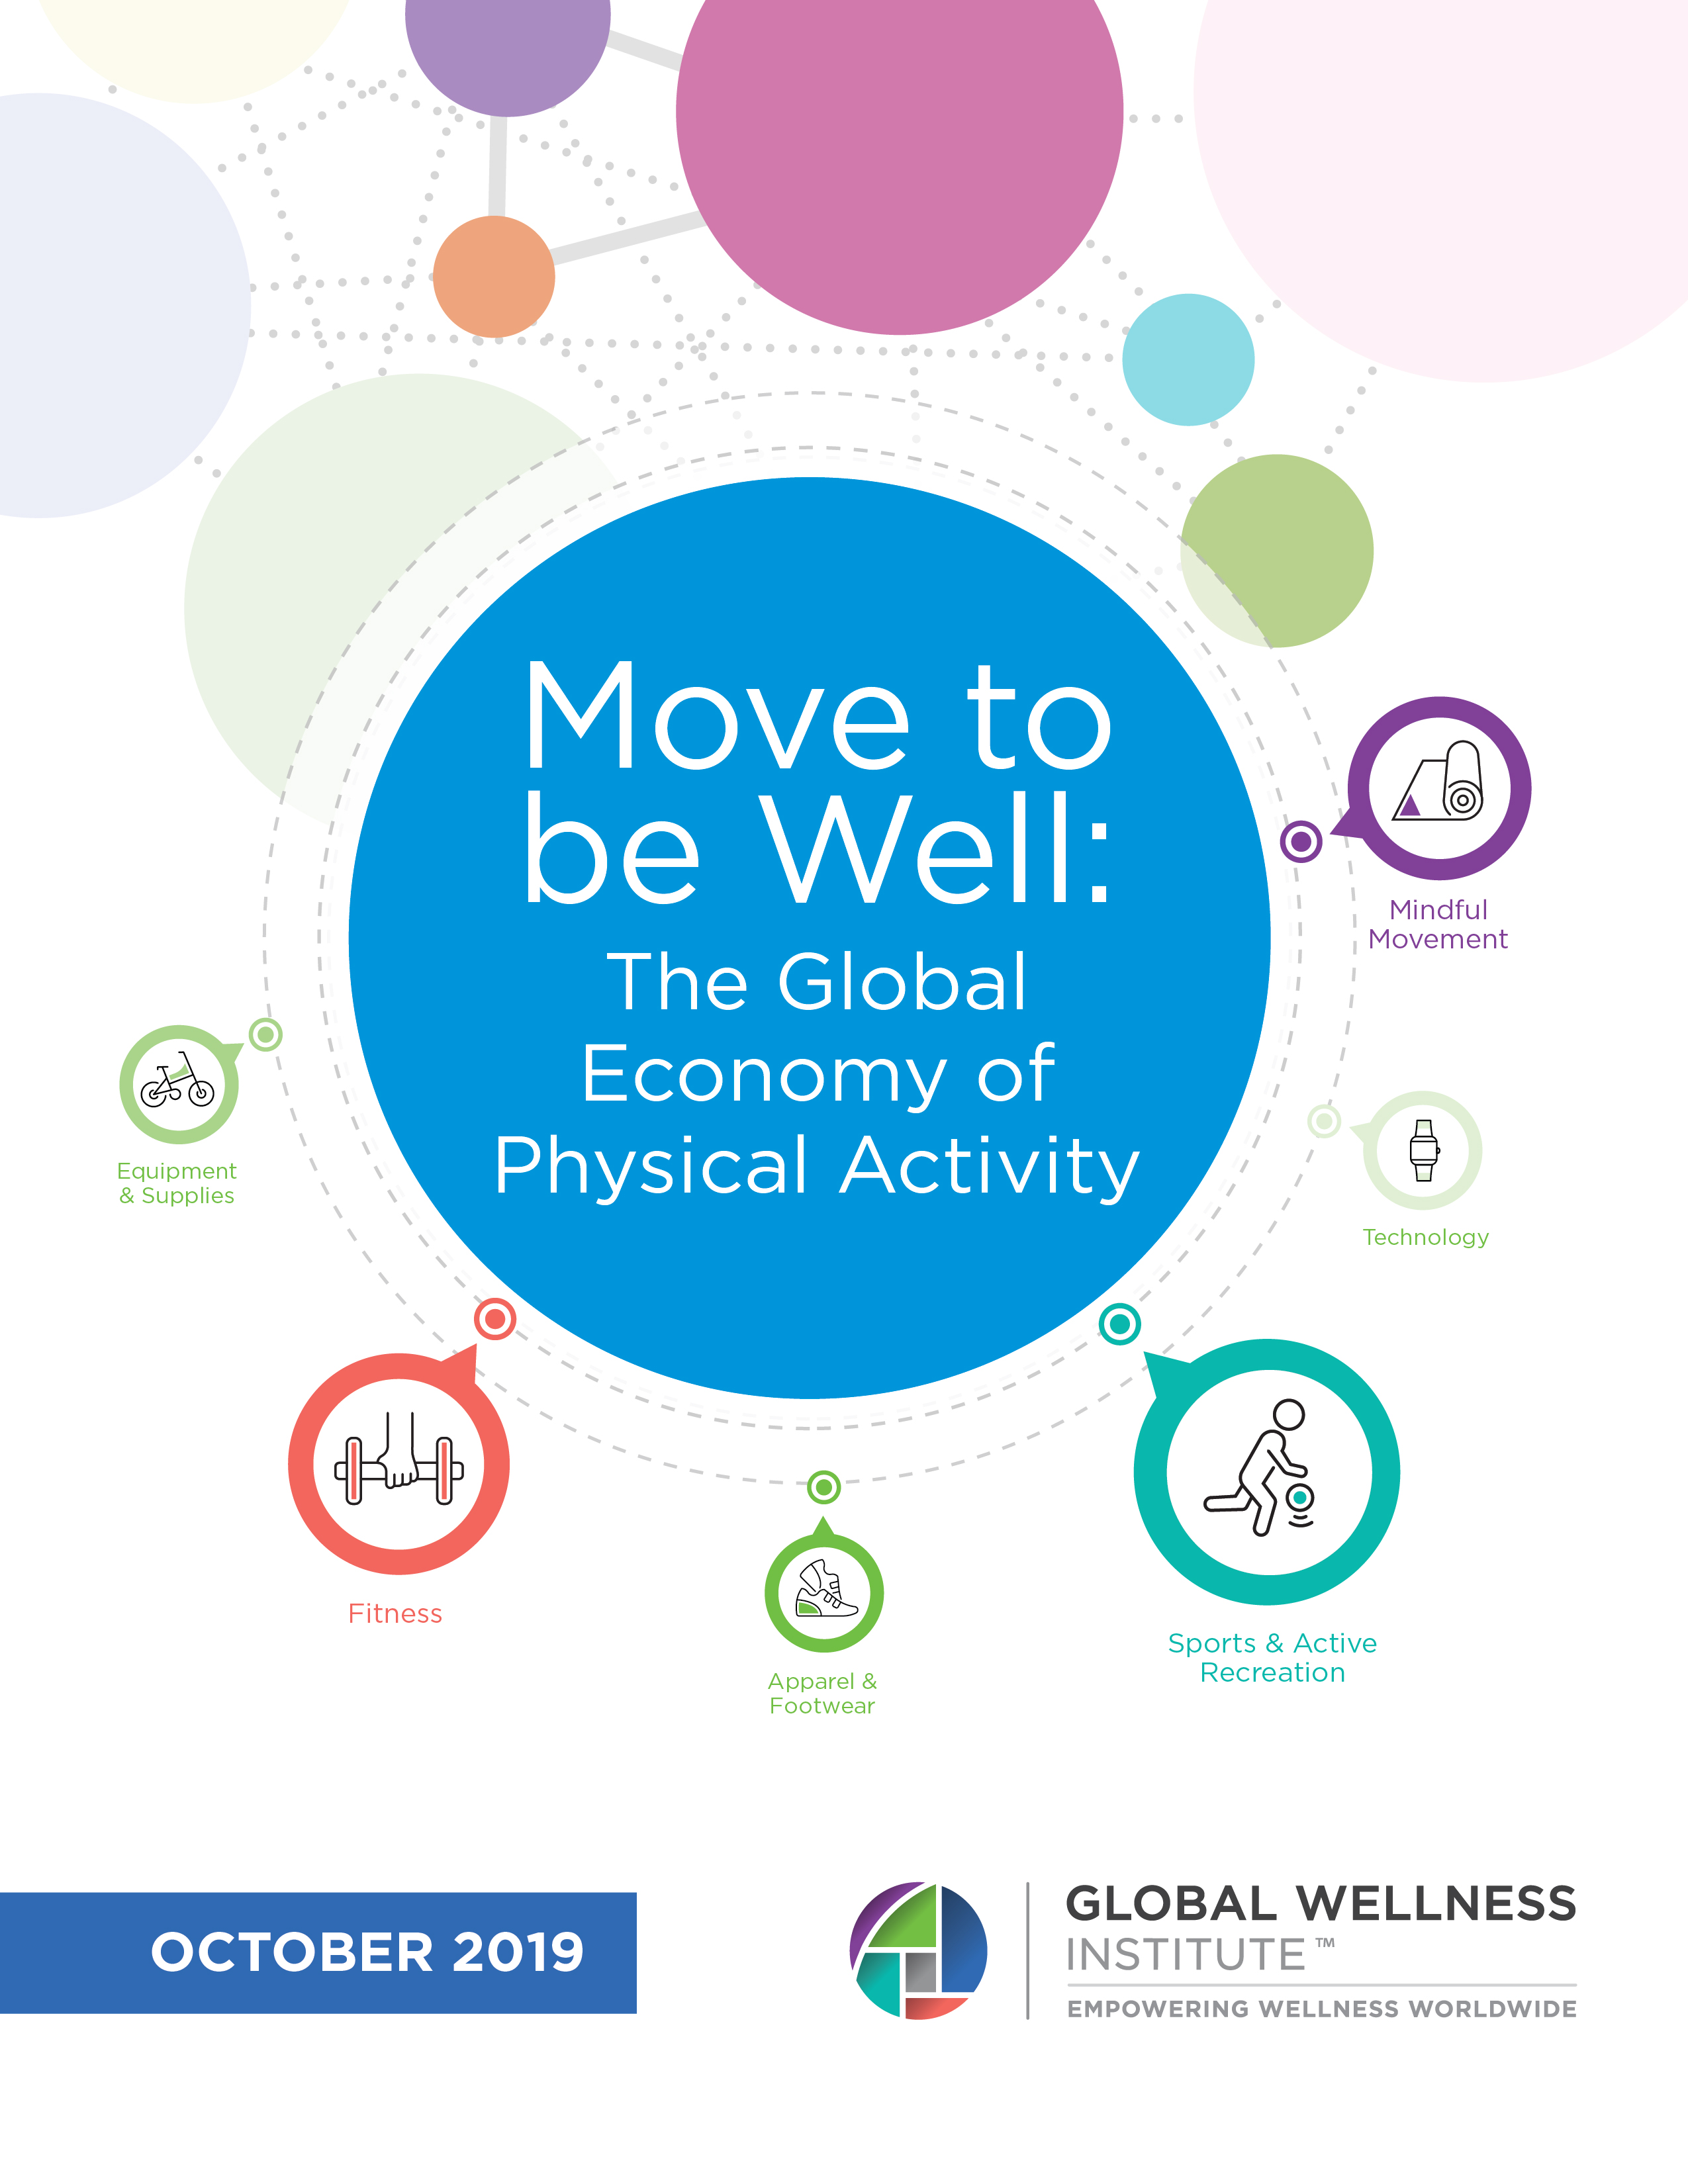 The Global Wellness Institute released its major research report for 2019: “Move To Be Well: The Global Economy of Physical Activity.”